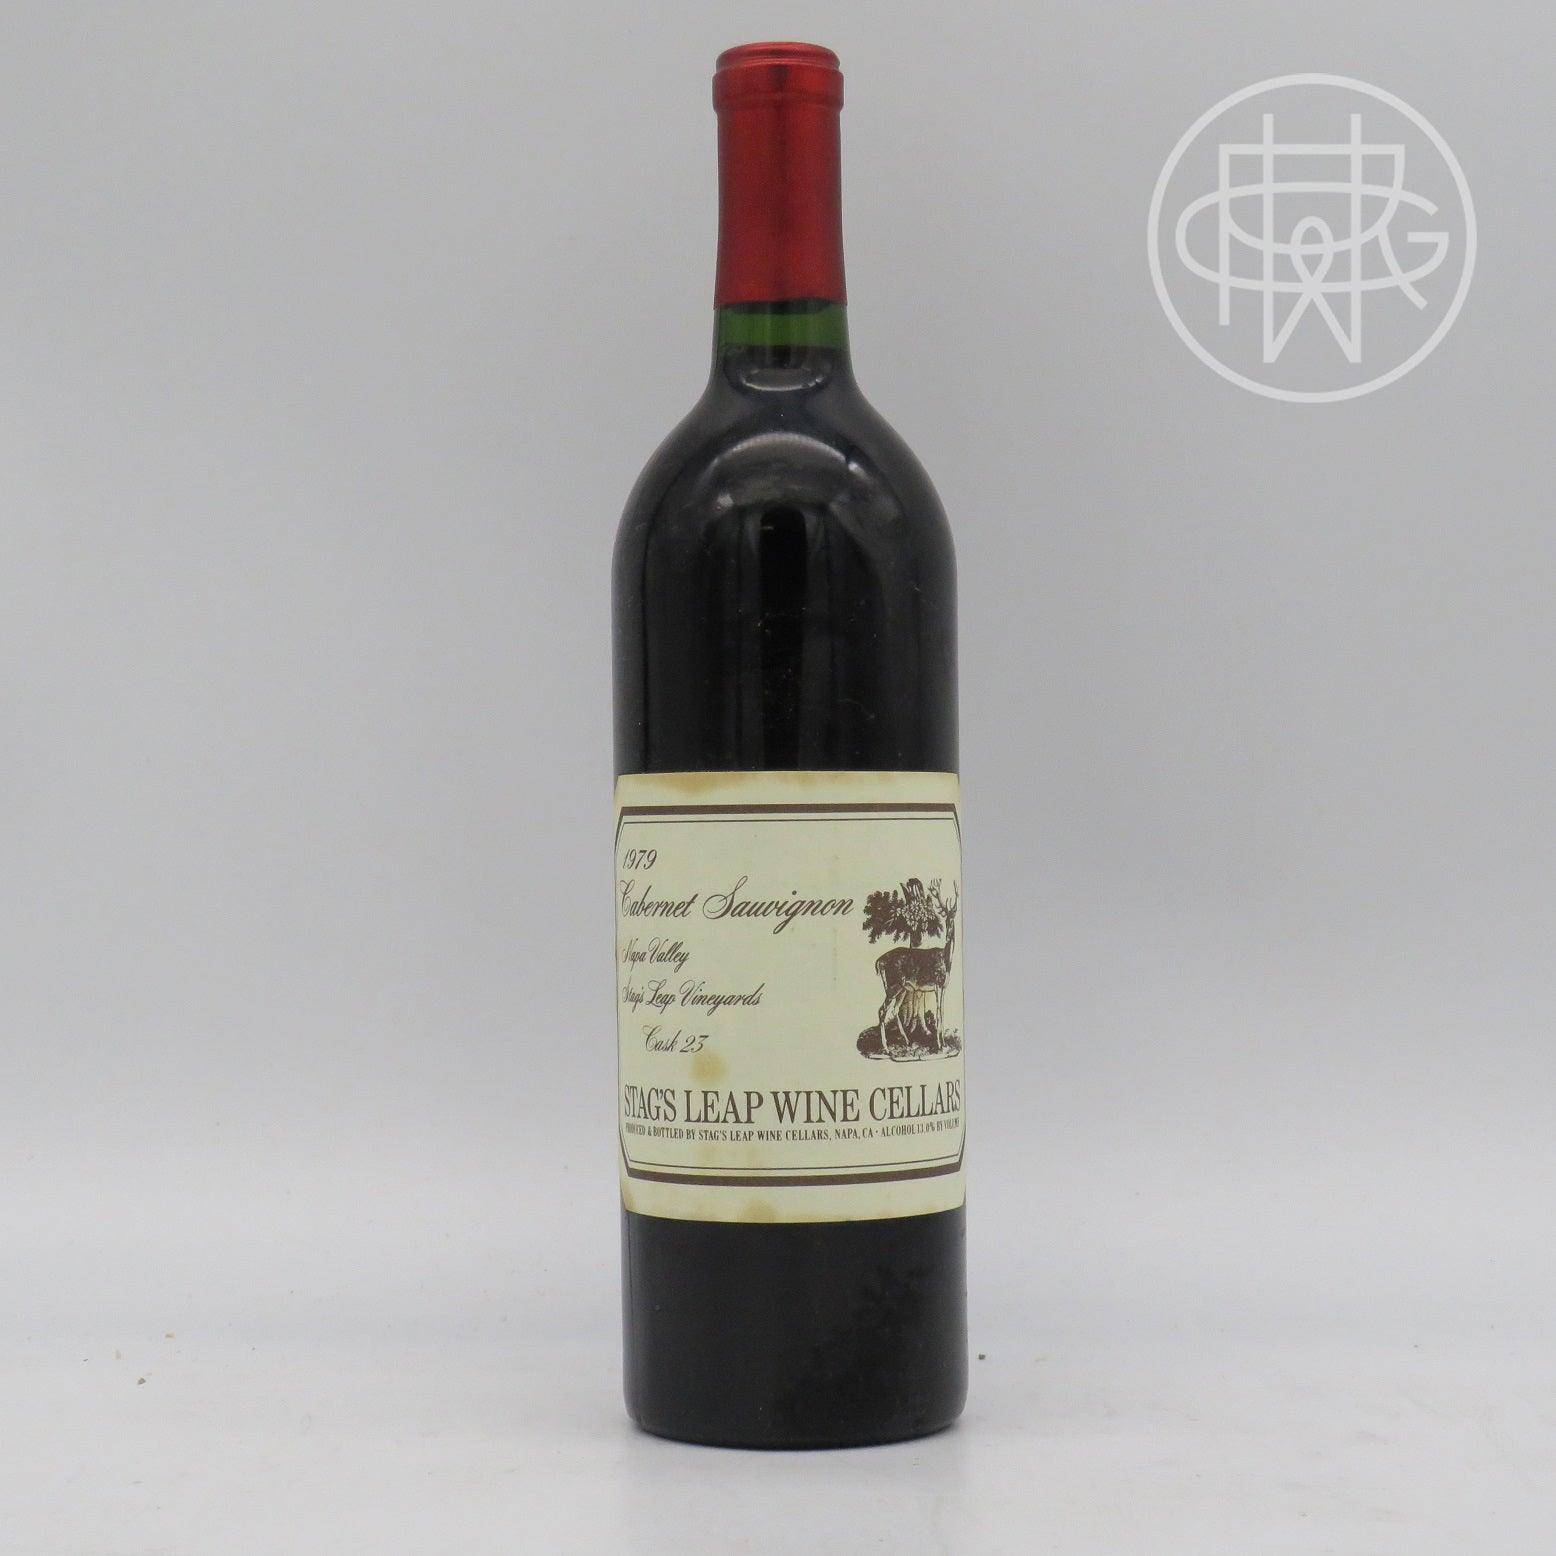 Stag's Leap Wine Cellars Cask 23 1979 750mL (Slightly Soiled Label) - GRW Wine Collection